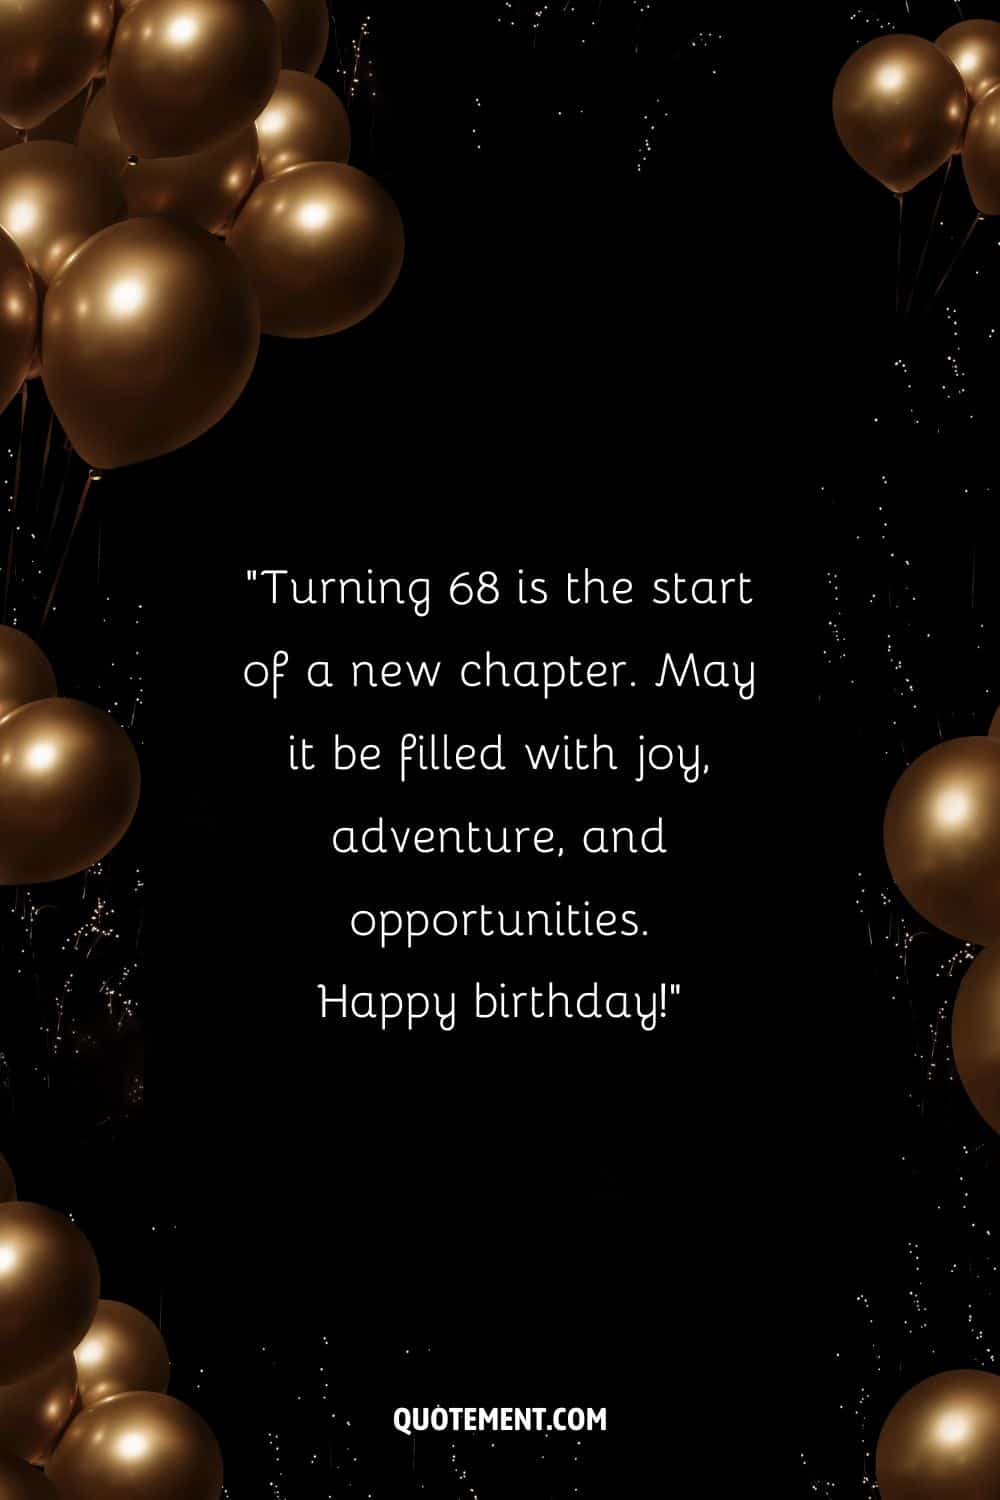 balloons on a black background representing an inspirational 68th birthday wish
